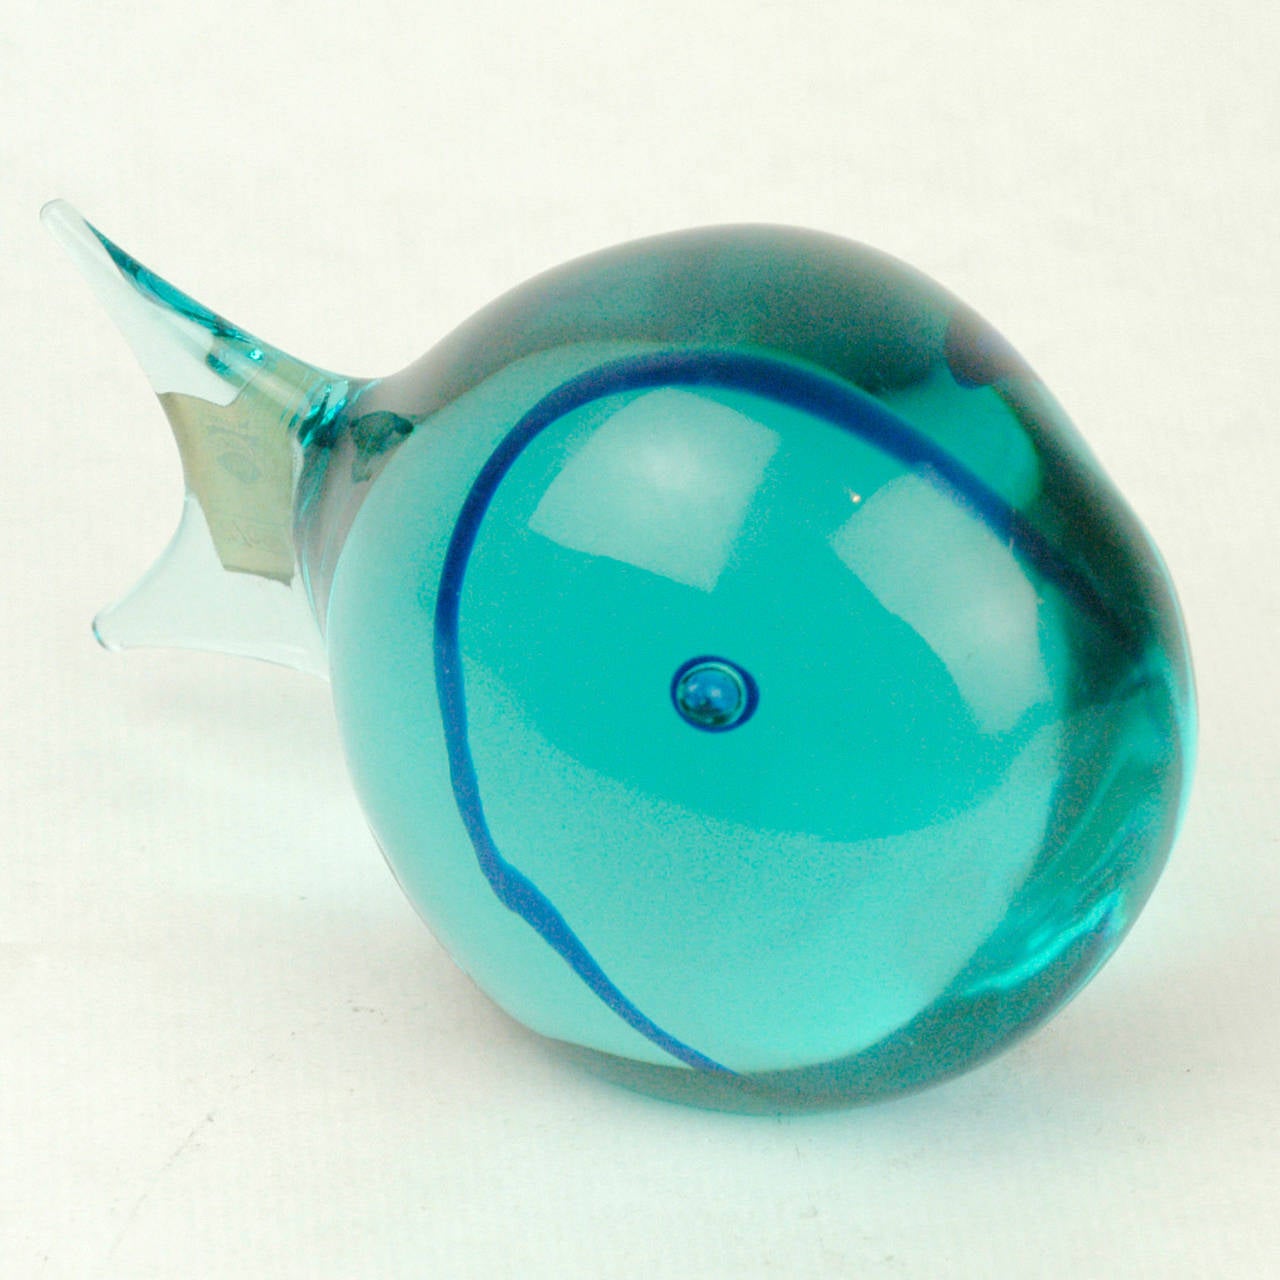 Amazing blue Murano glass fish with original old manufacturer's label.

Antonio da Ros was Cenedese's art director in the 1950s and 1960s, he is famous for his designs for vases and glass animals in the 